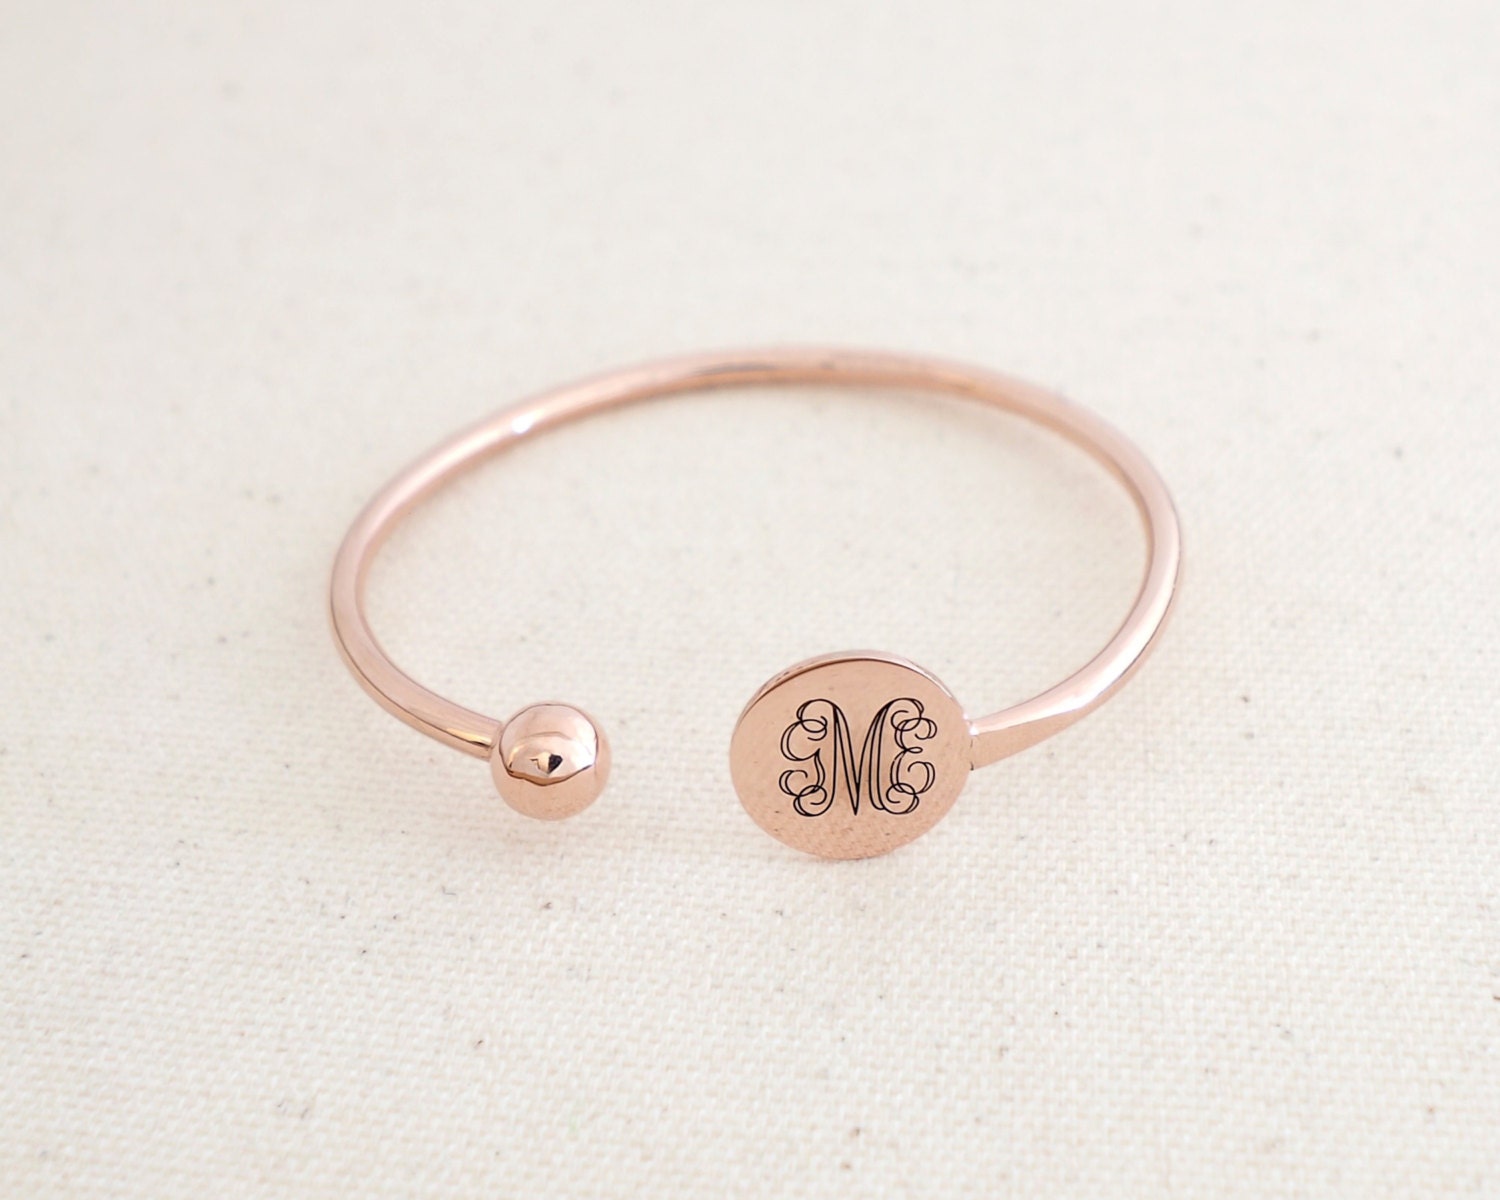 Adjustable Monogram Bangle Personalized Cuff Bridesmaid Gifts Bridal Jewelry Initials Gift For Her Bm30